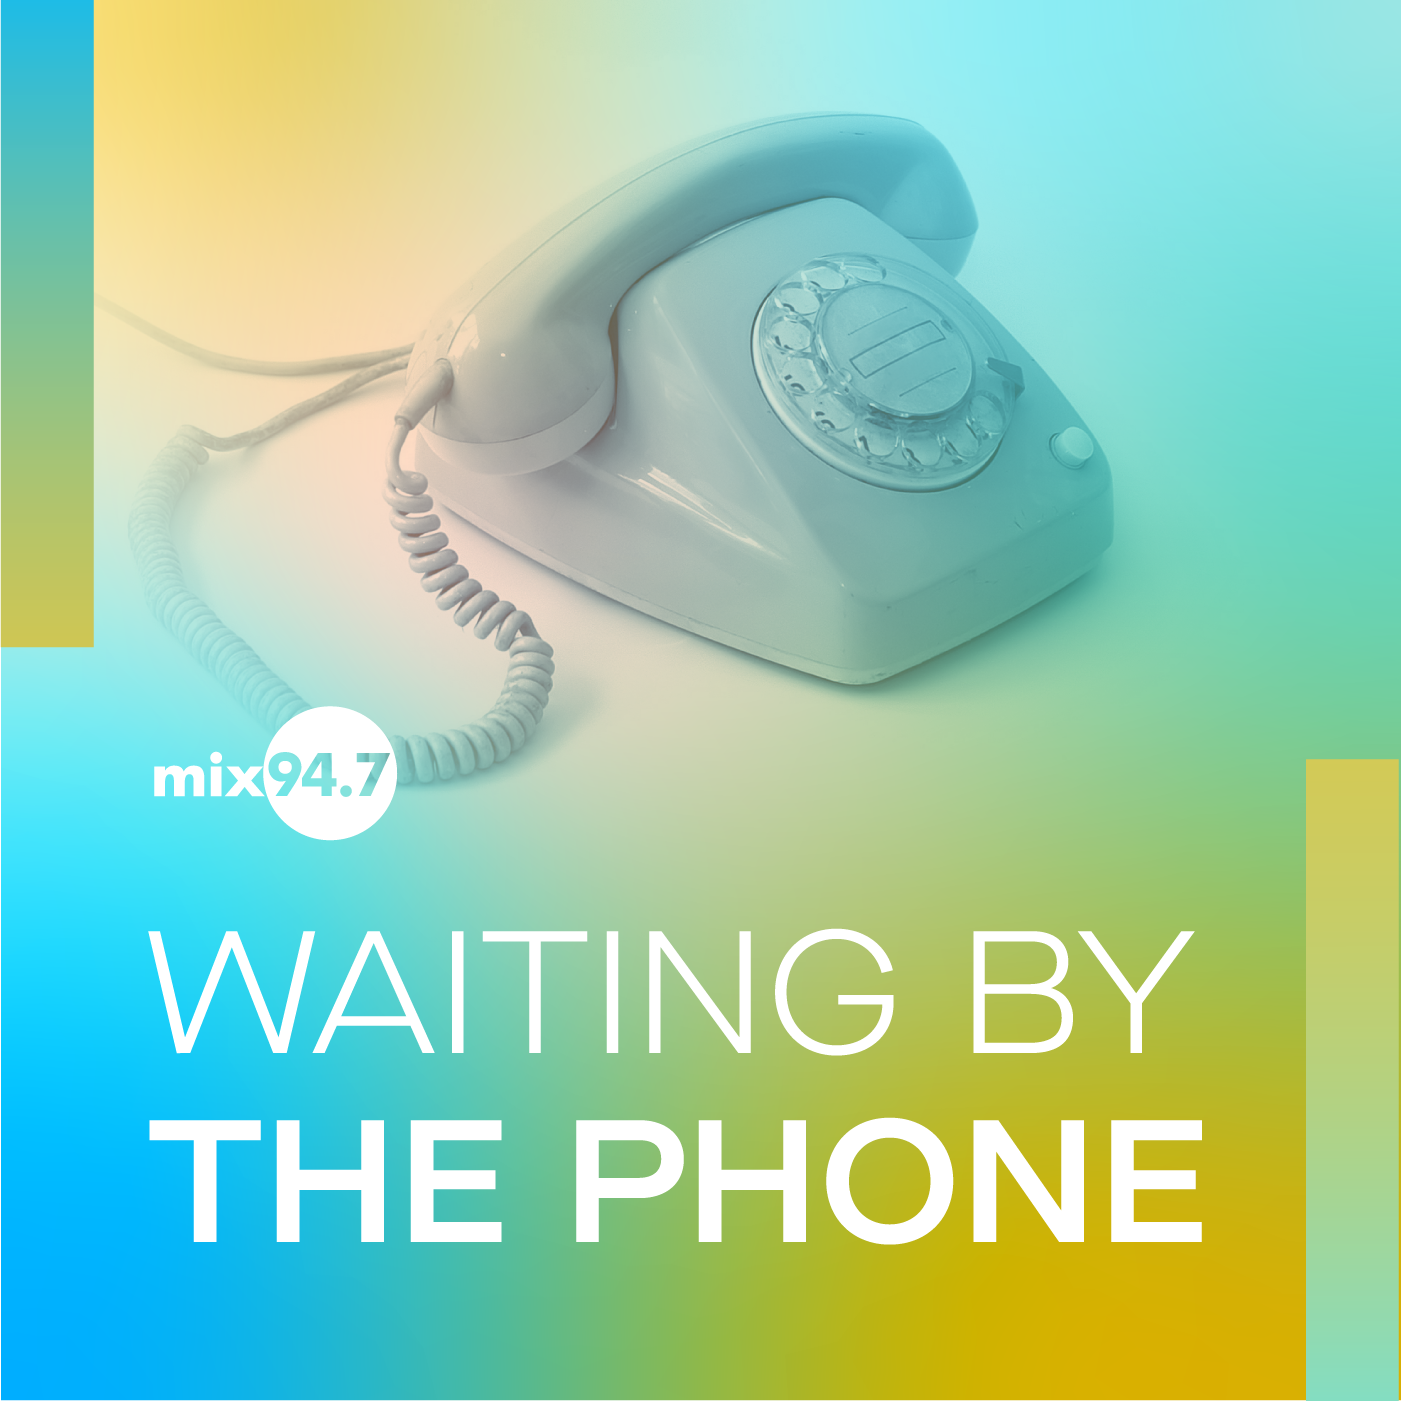 Waiting By The Phone: When being frugal backfires